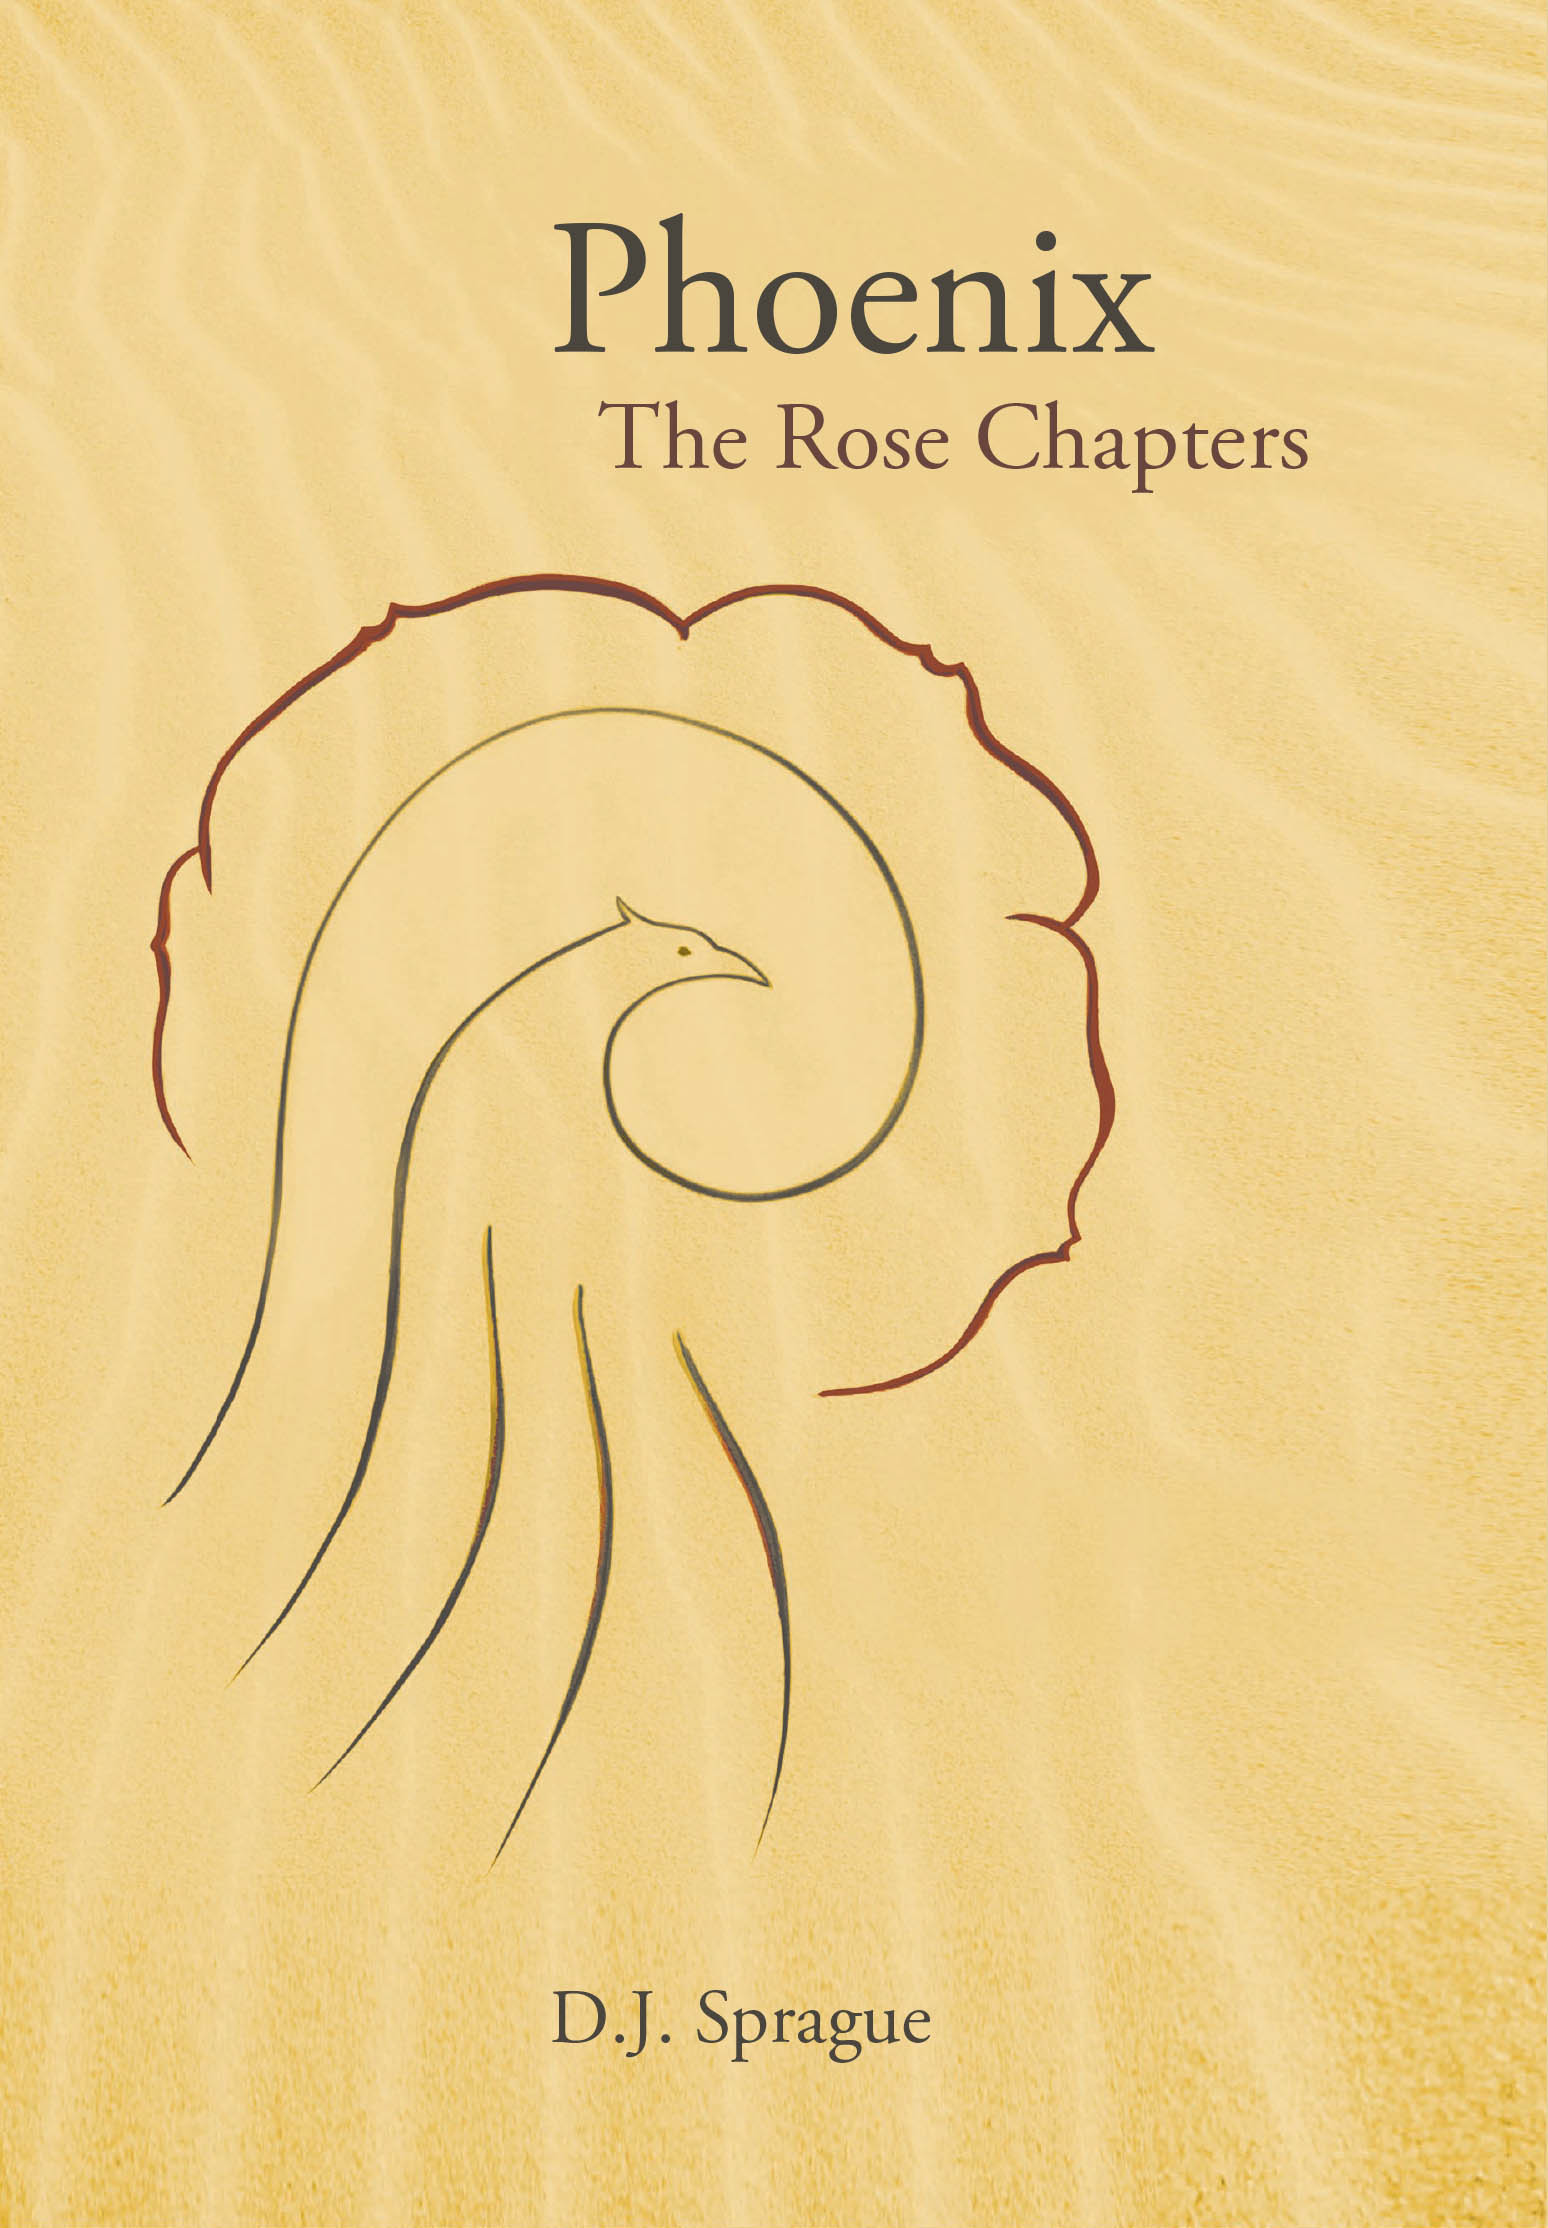 D.J. Sprague’s New Book, "Phoenix: The Rose Chapters," is a Thought-Provoking and Captivating Journey of One Searching for Love and Meaning Within This Vast World